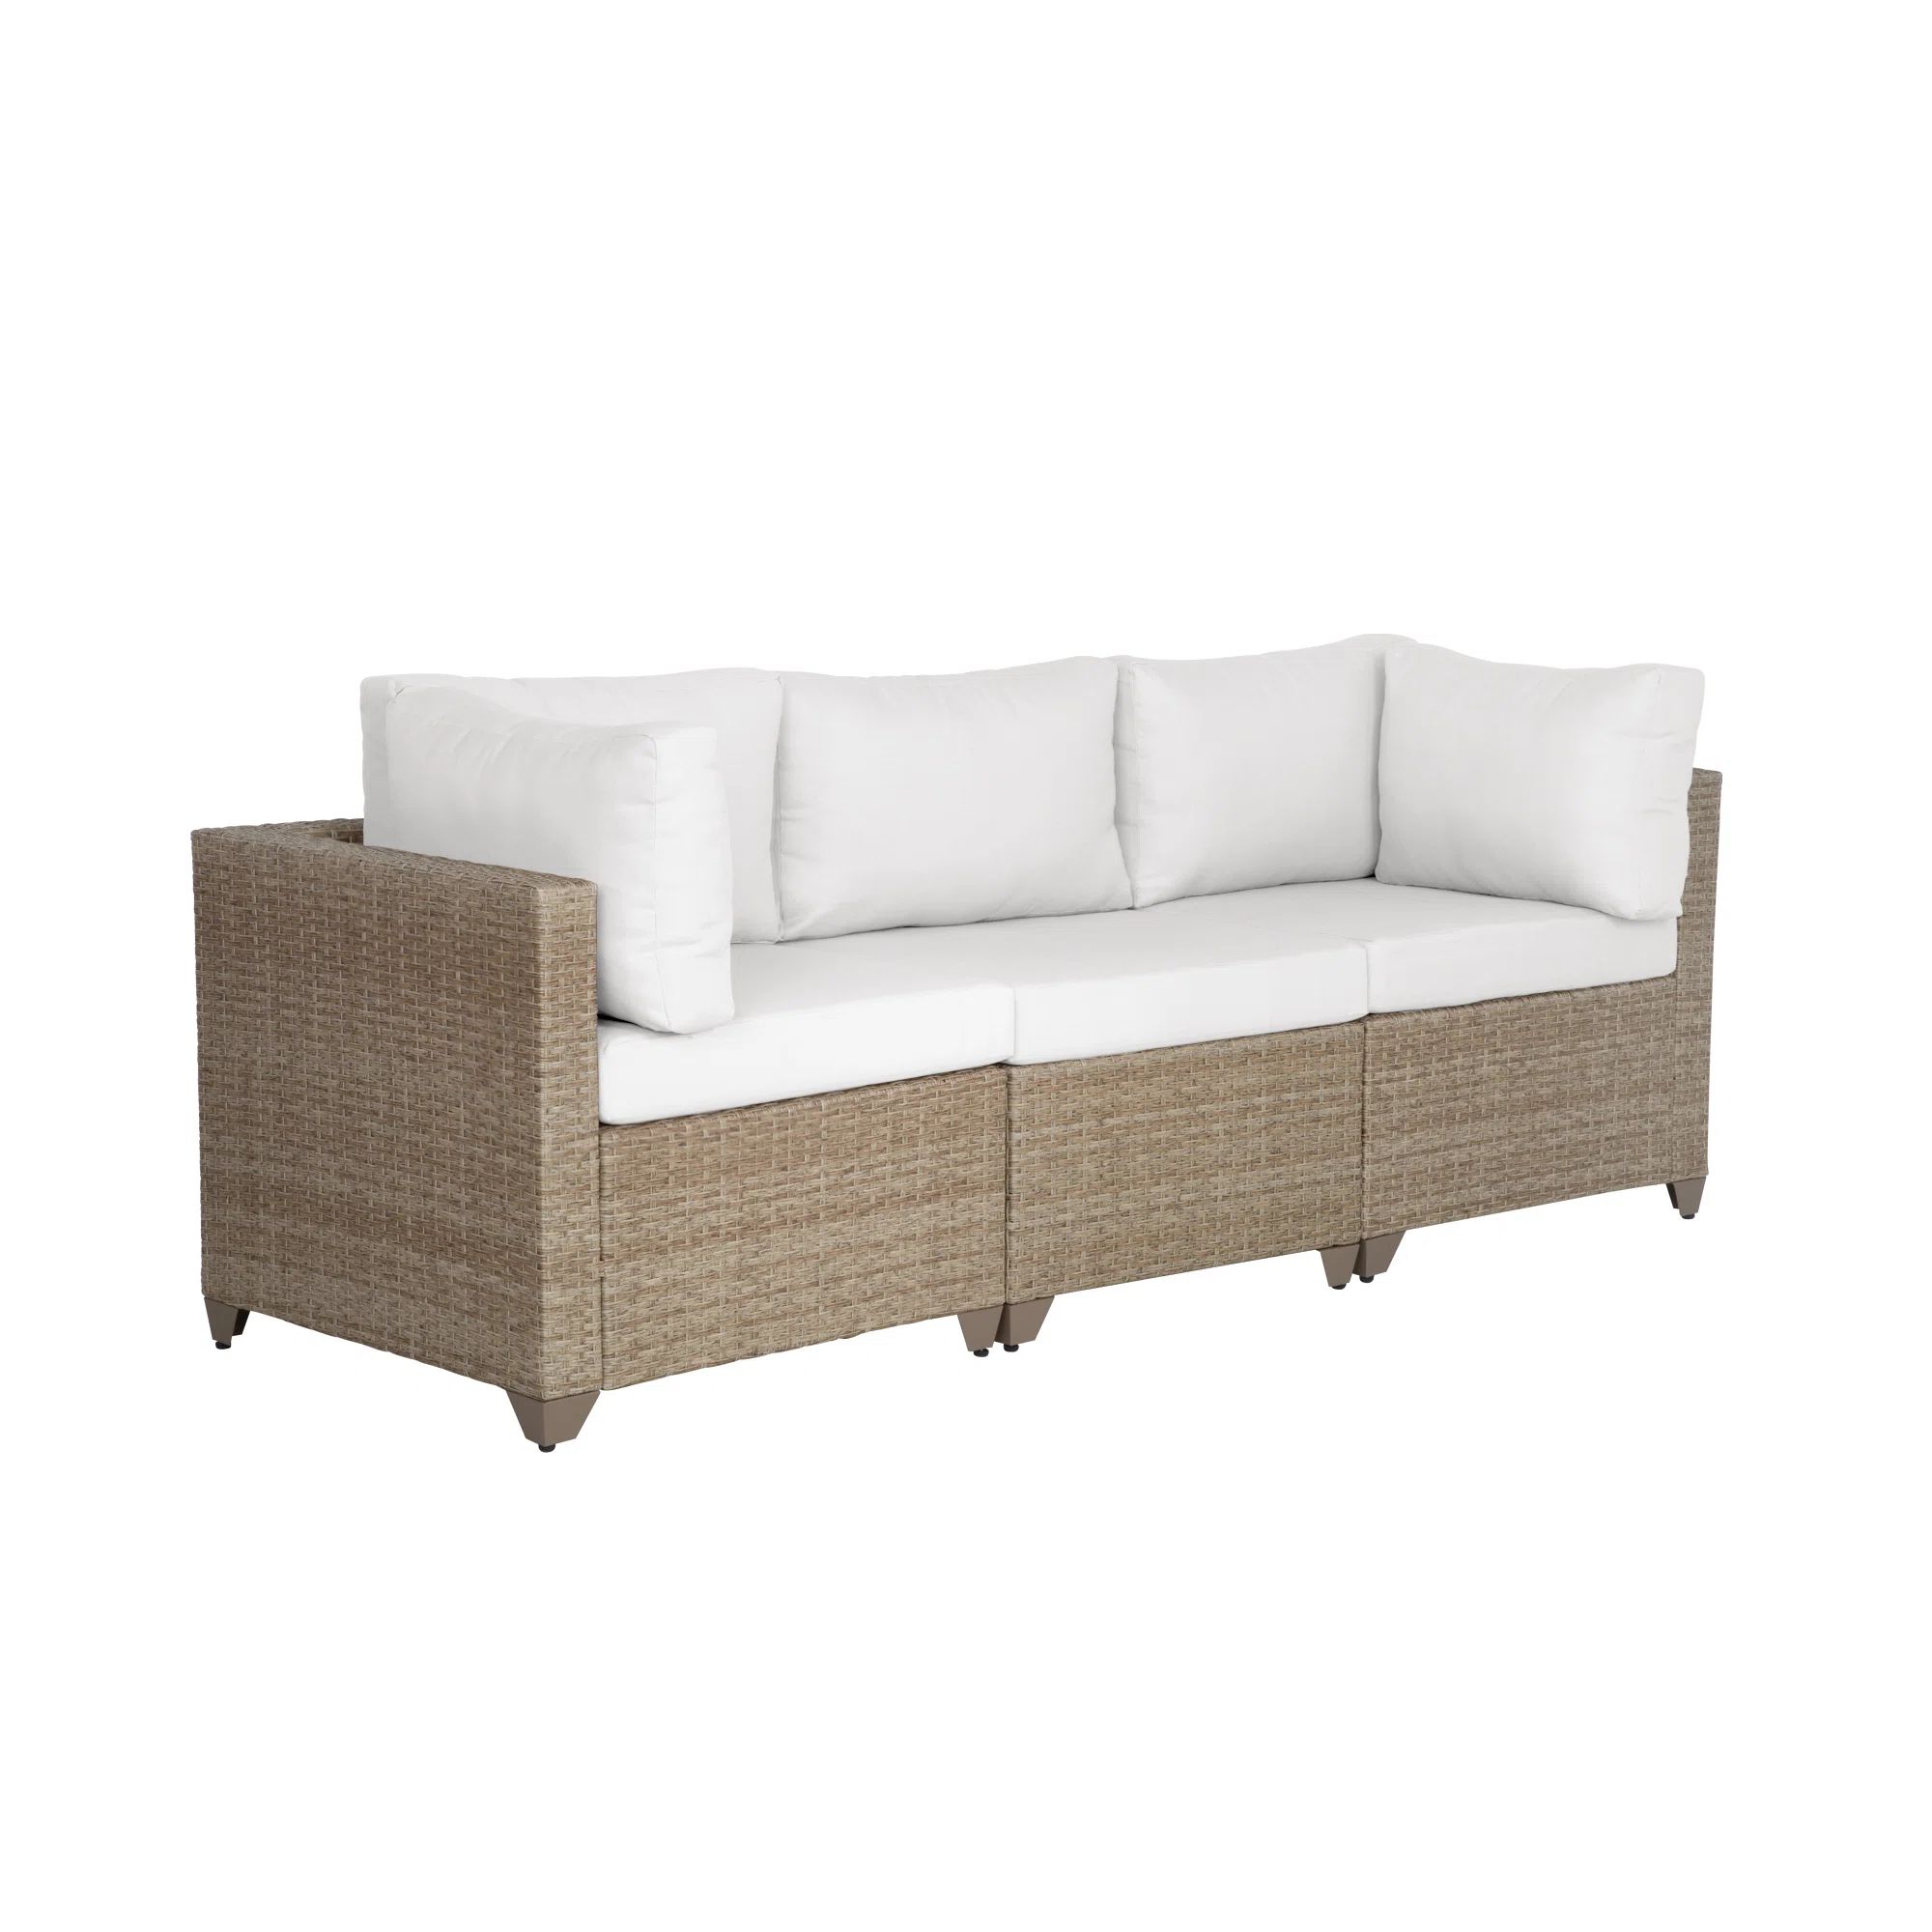 Maui 3-Piece Outdoor Sectional Sofa in Natural Aged WickerSee More by Ebern DesignsRated 4.4 out ... | Wayfair North America